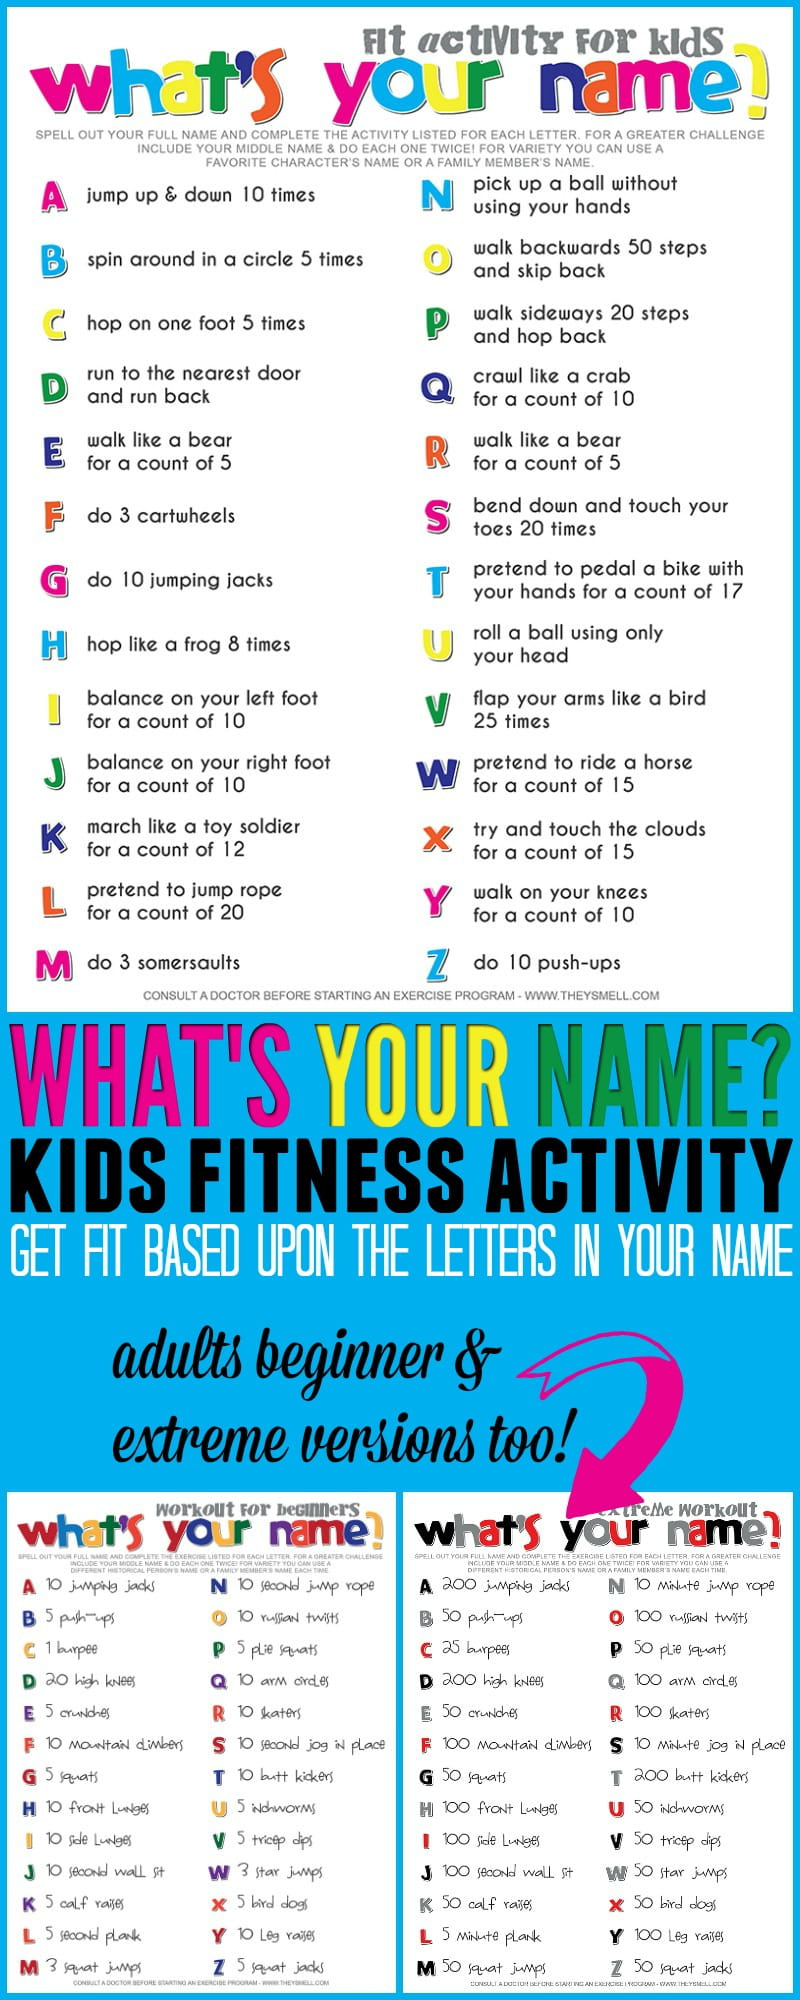 Whats Your Name? Fitness Activity Printable for Kids  730 Sage Street